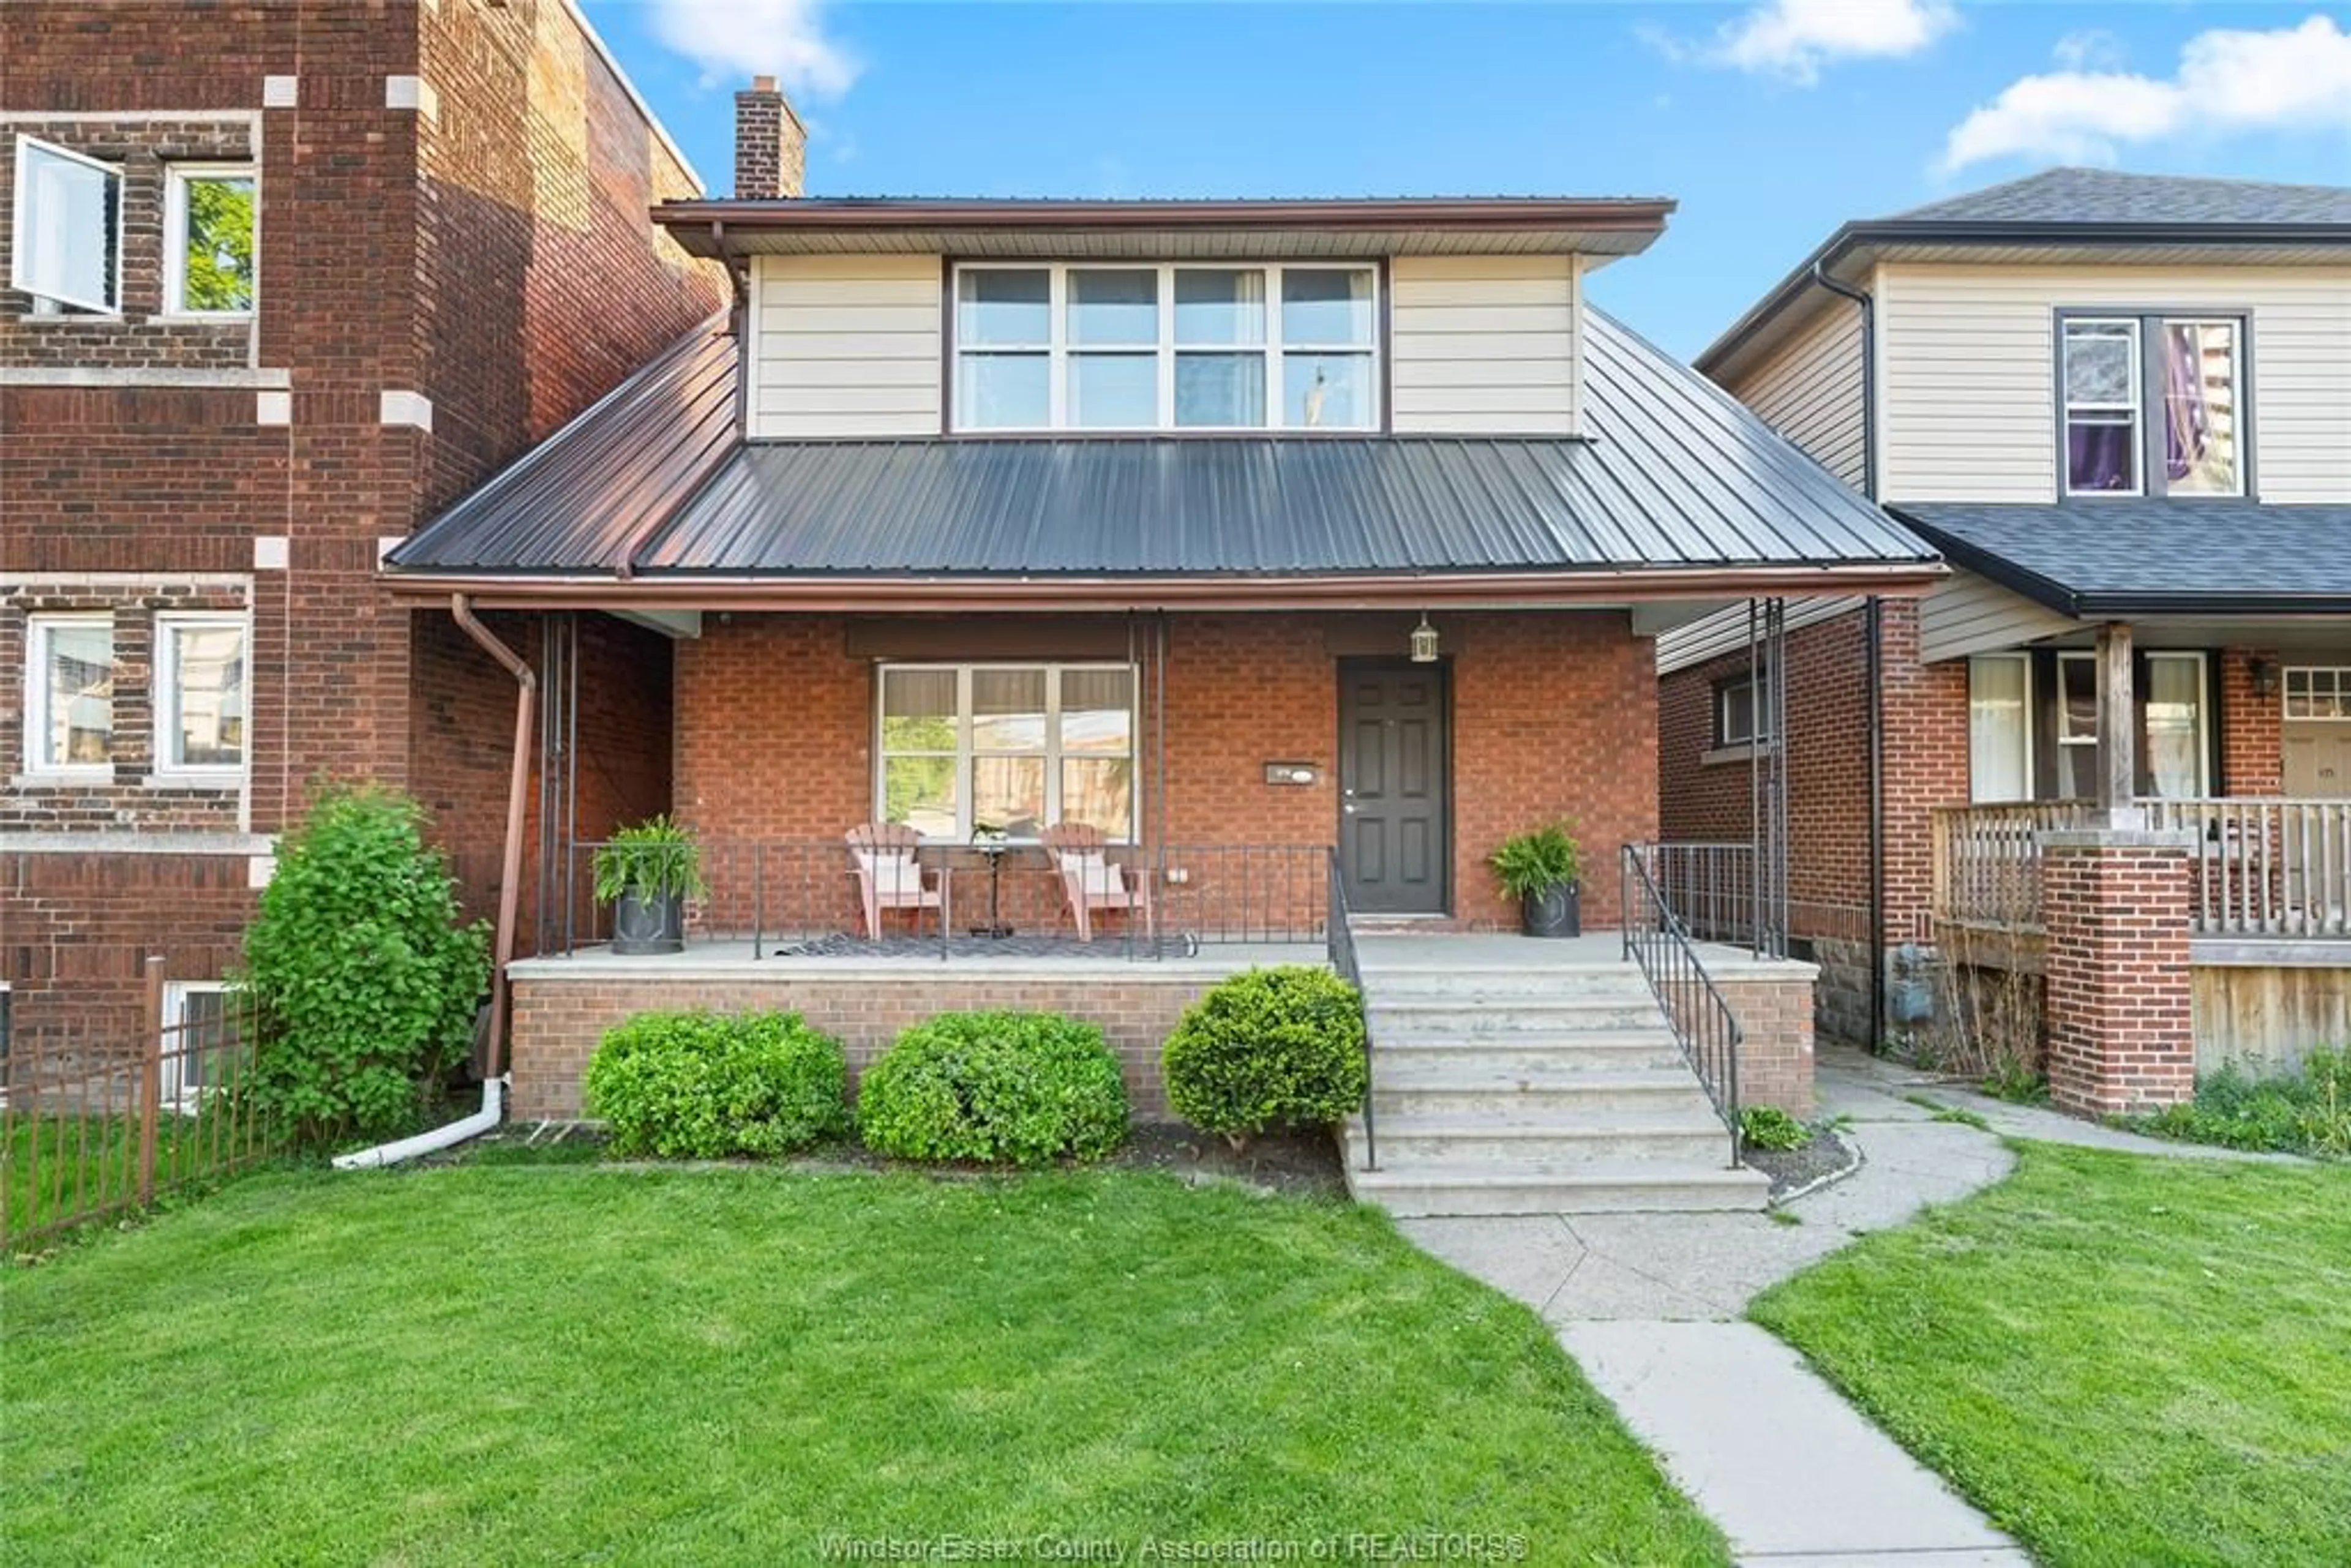 Home with brick exterior material for 979 PELISSIER St, Windsor Ontario N9A 4L6